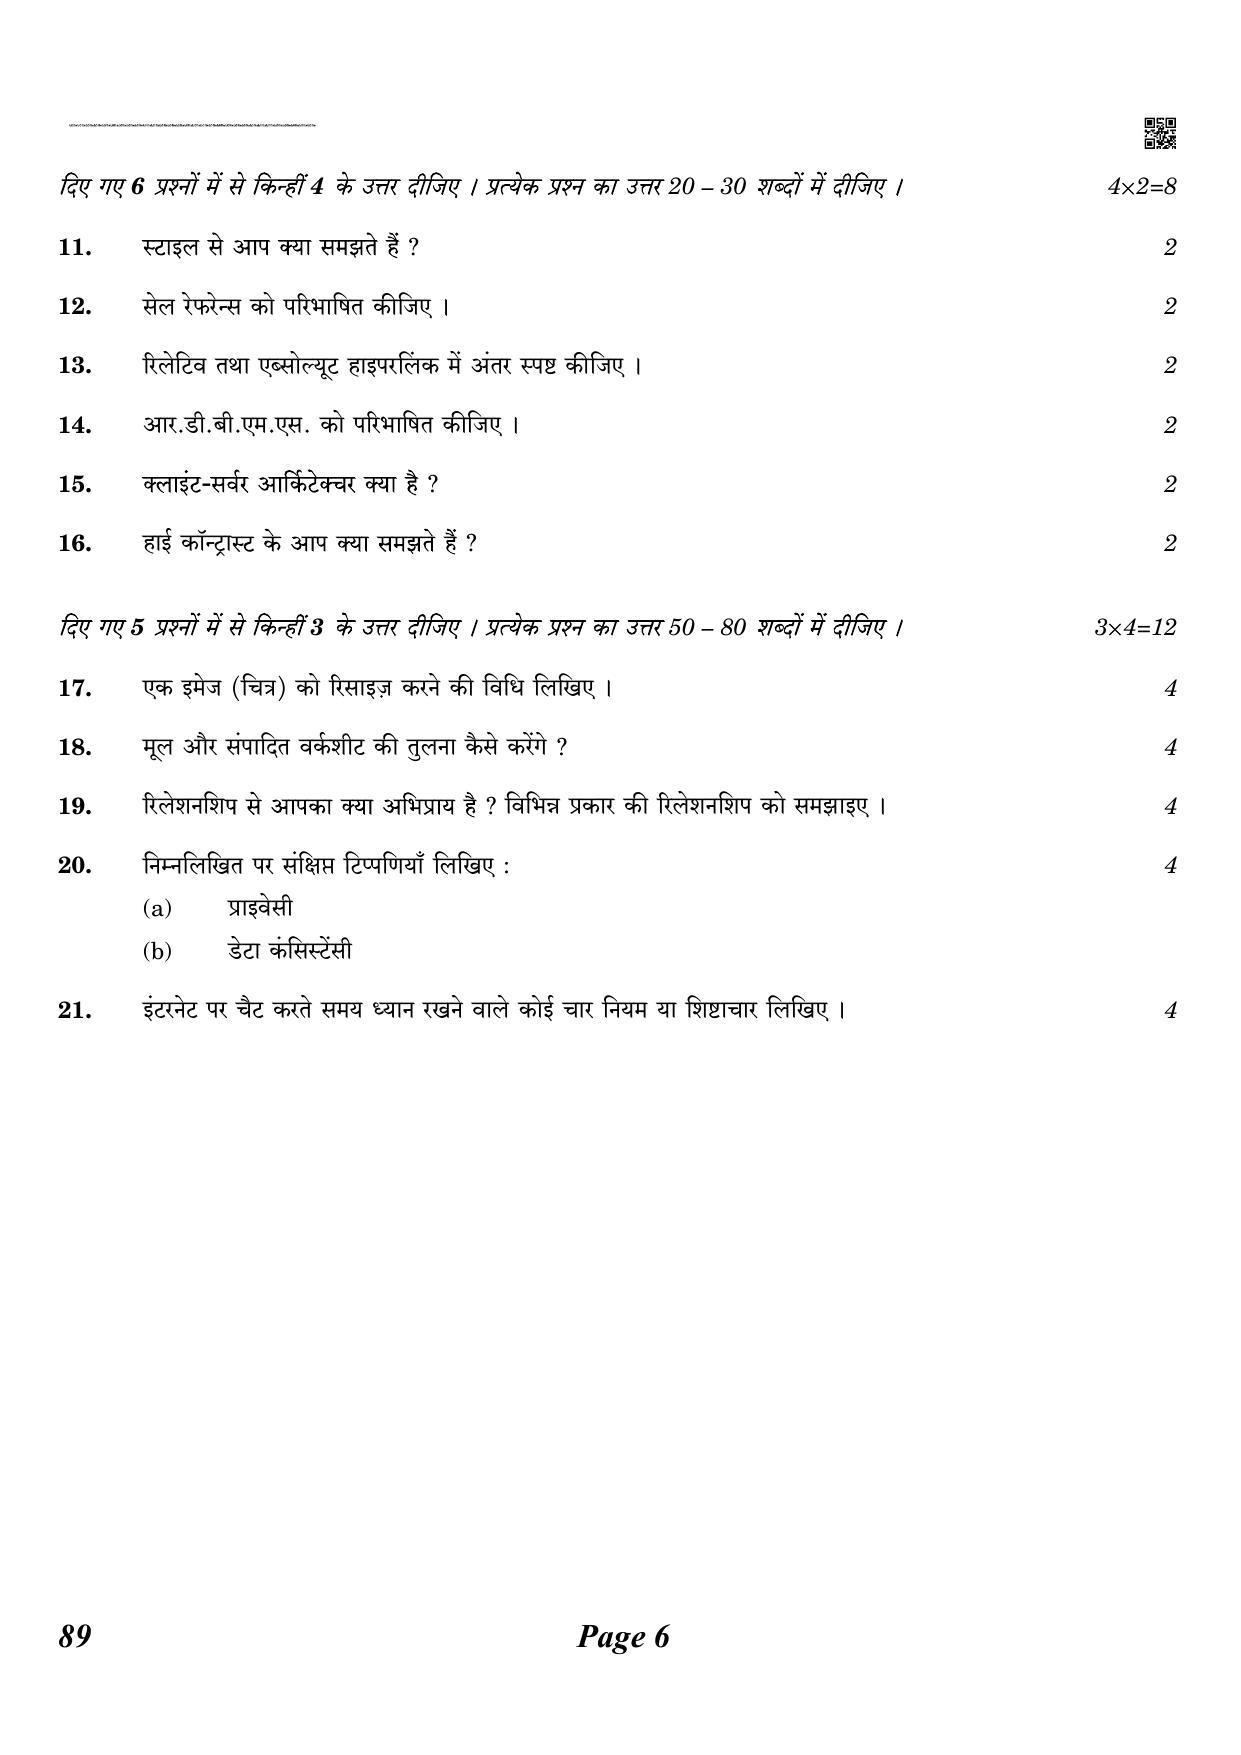 CBSE Class 10 QP_402_INFORMATION_TECH_HINDI 2021 Compartment Question Paper - Page 6